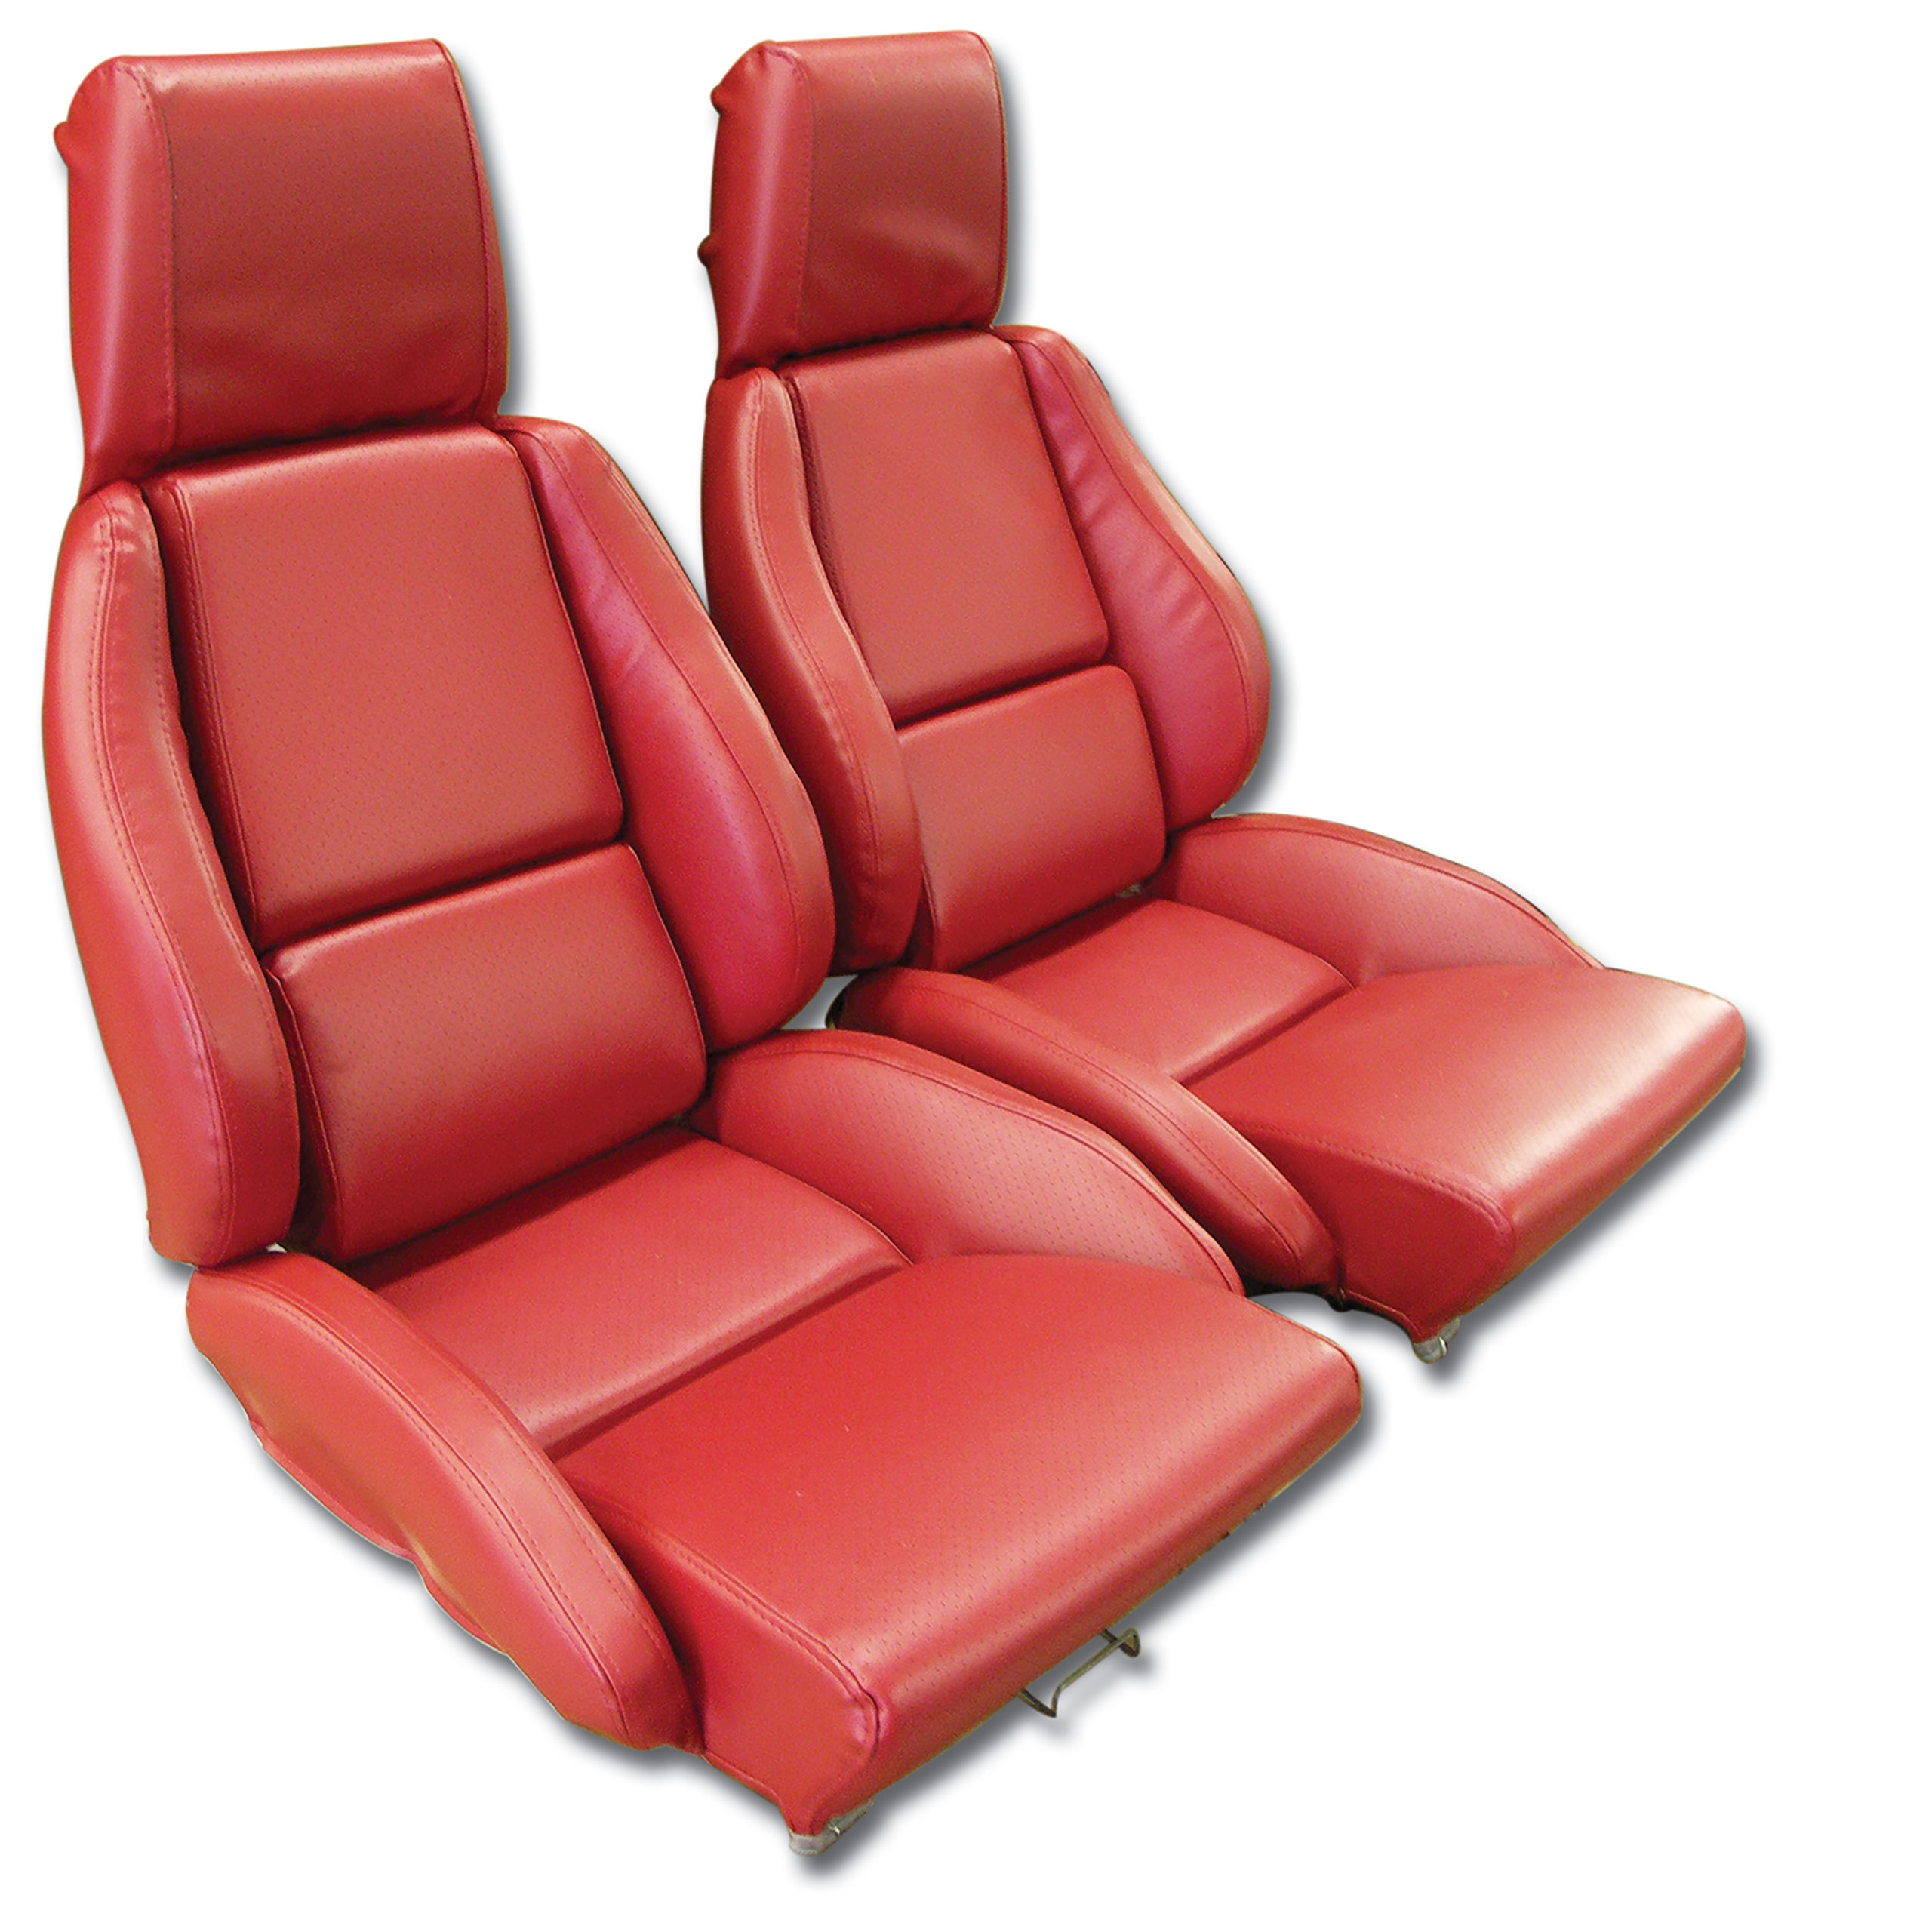 1986-1988 Corvette C4 Mounted "Leather-Like" Vinyl Seat Covers Red Stn CA-422975 